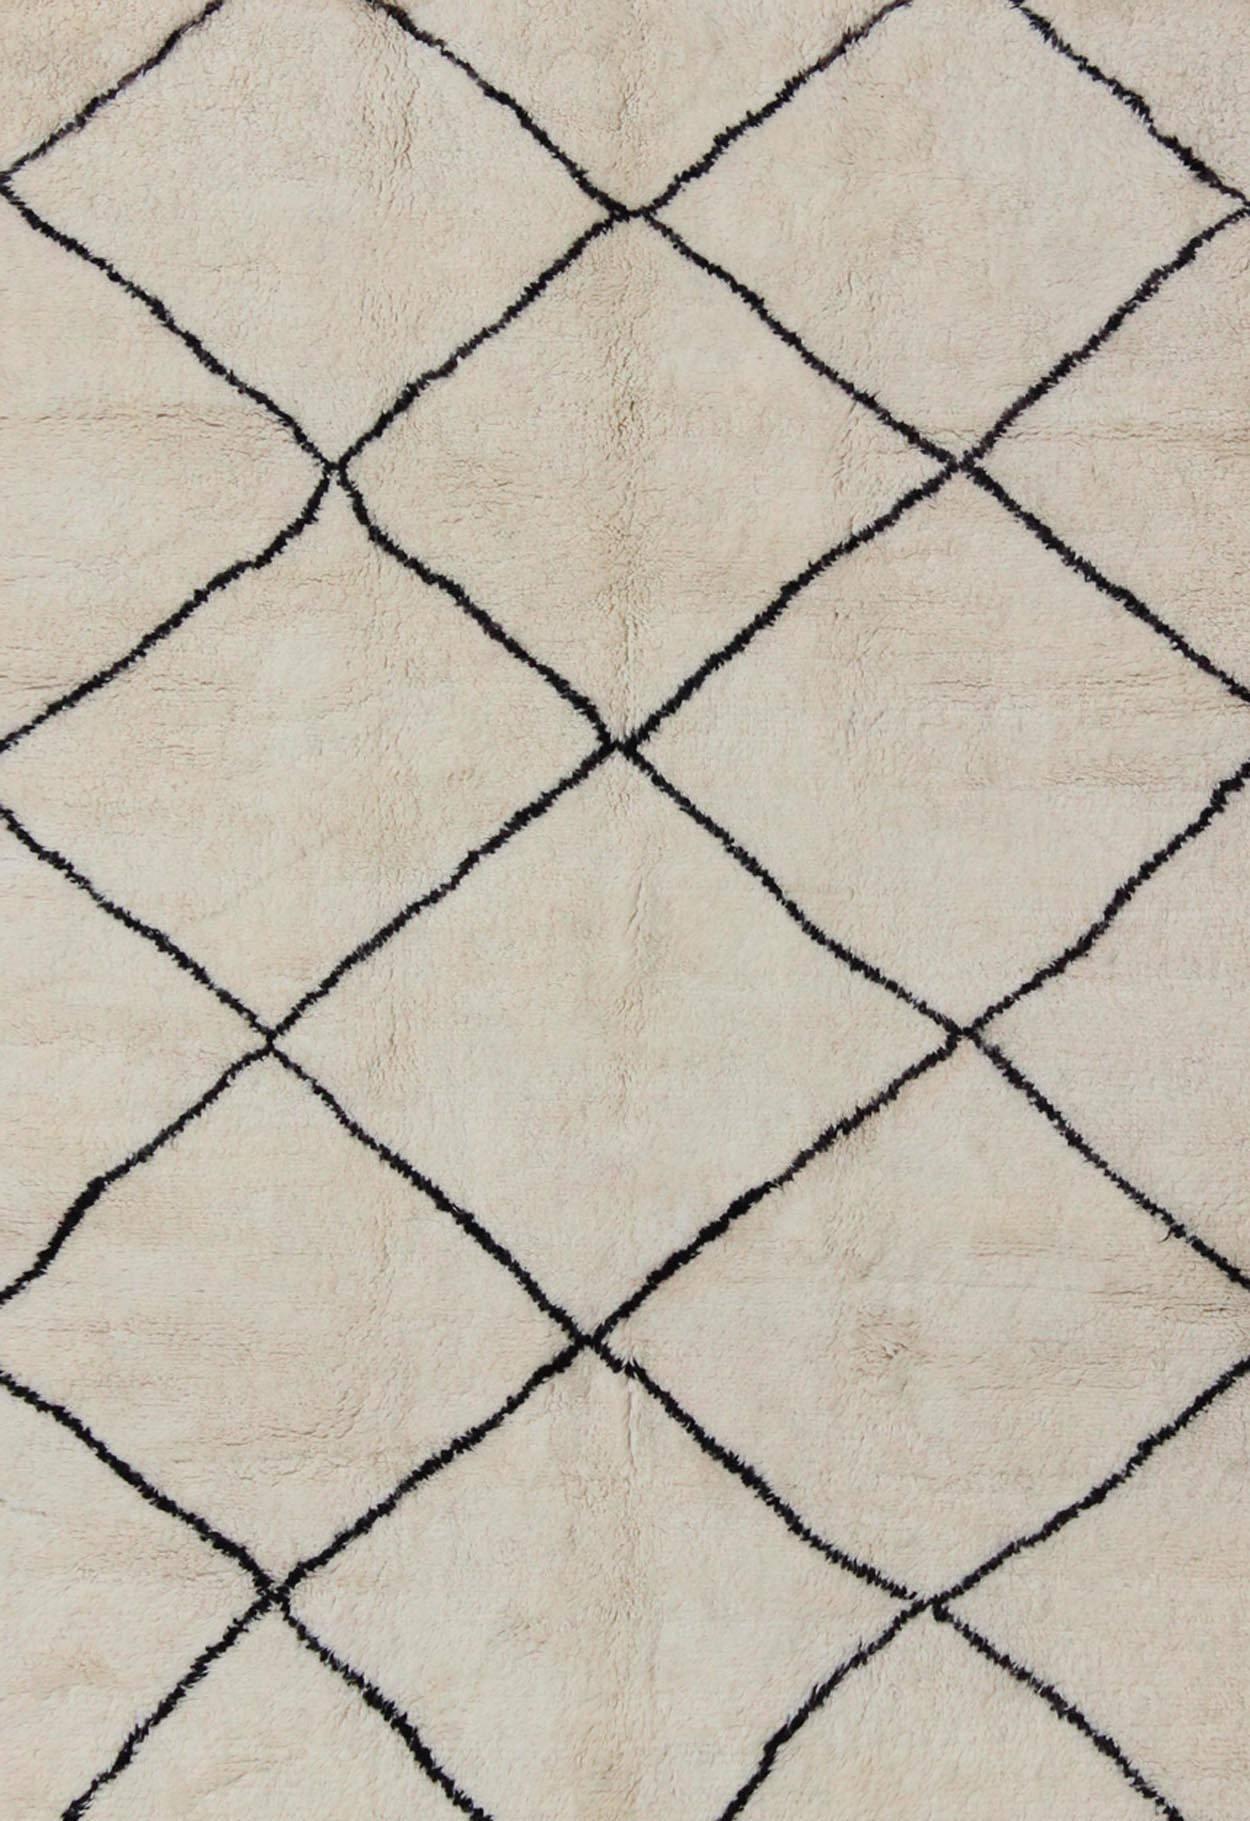 Tribal Contemporary/Modern Moroccan Rug Vintage with Brown and Ivory Diamond Pattern For Sale